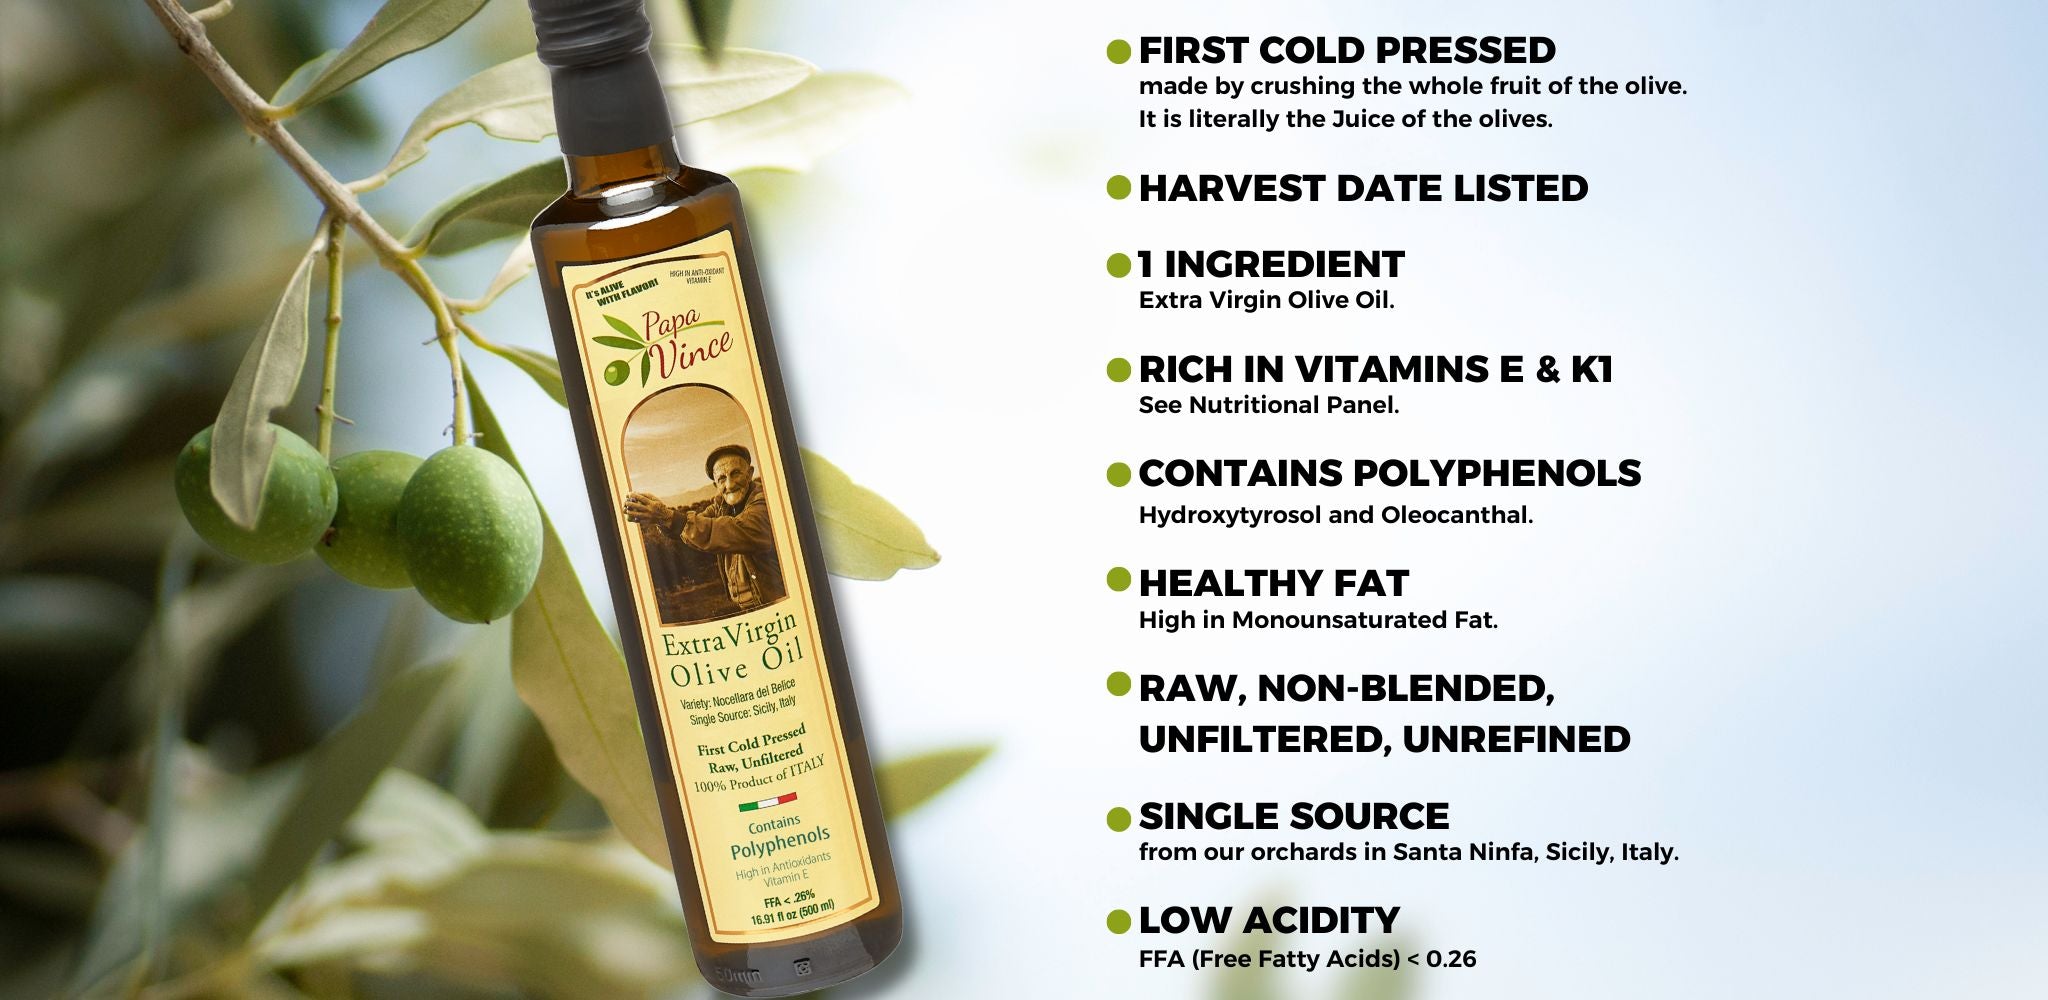 High-Quality Extra Virgin Olive Oil from Papa Vince features